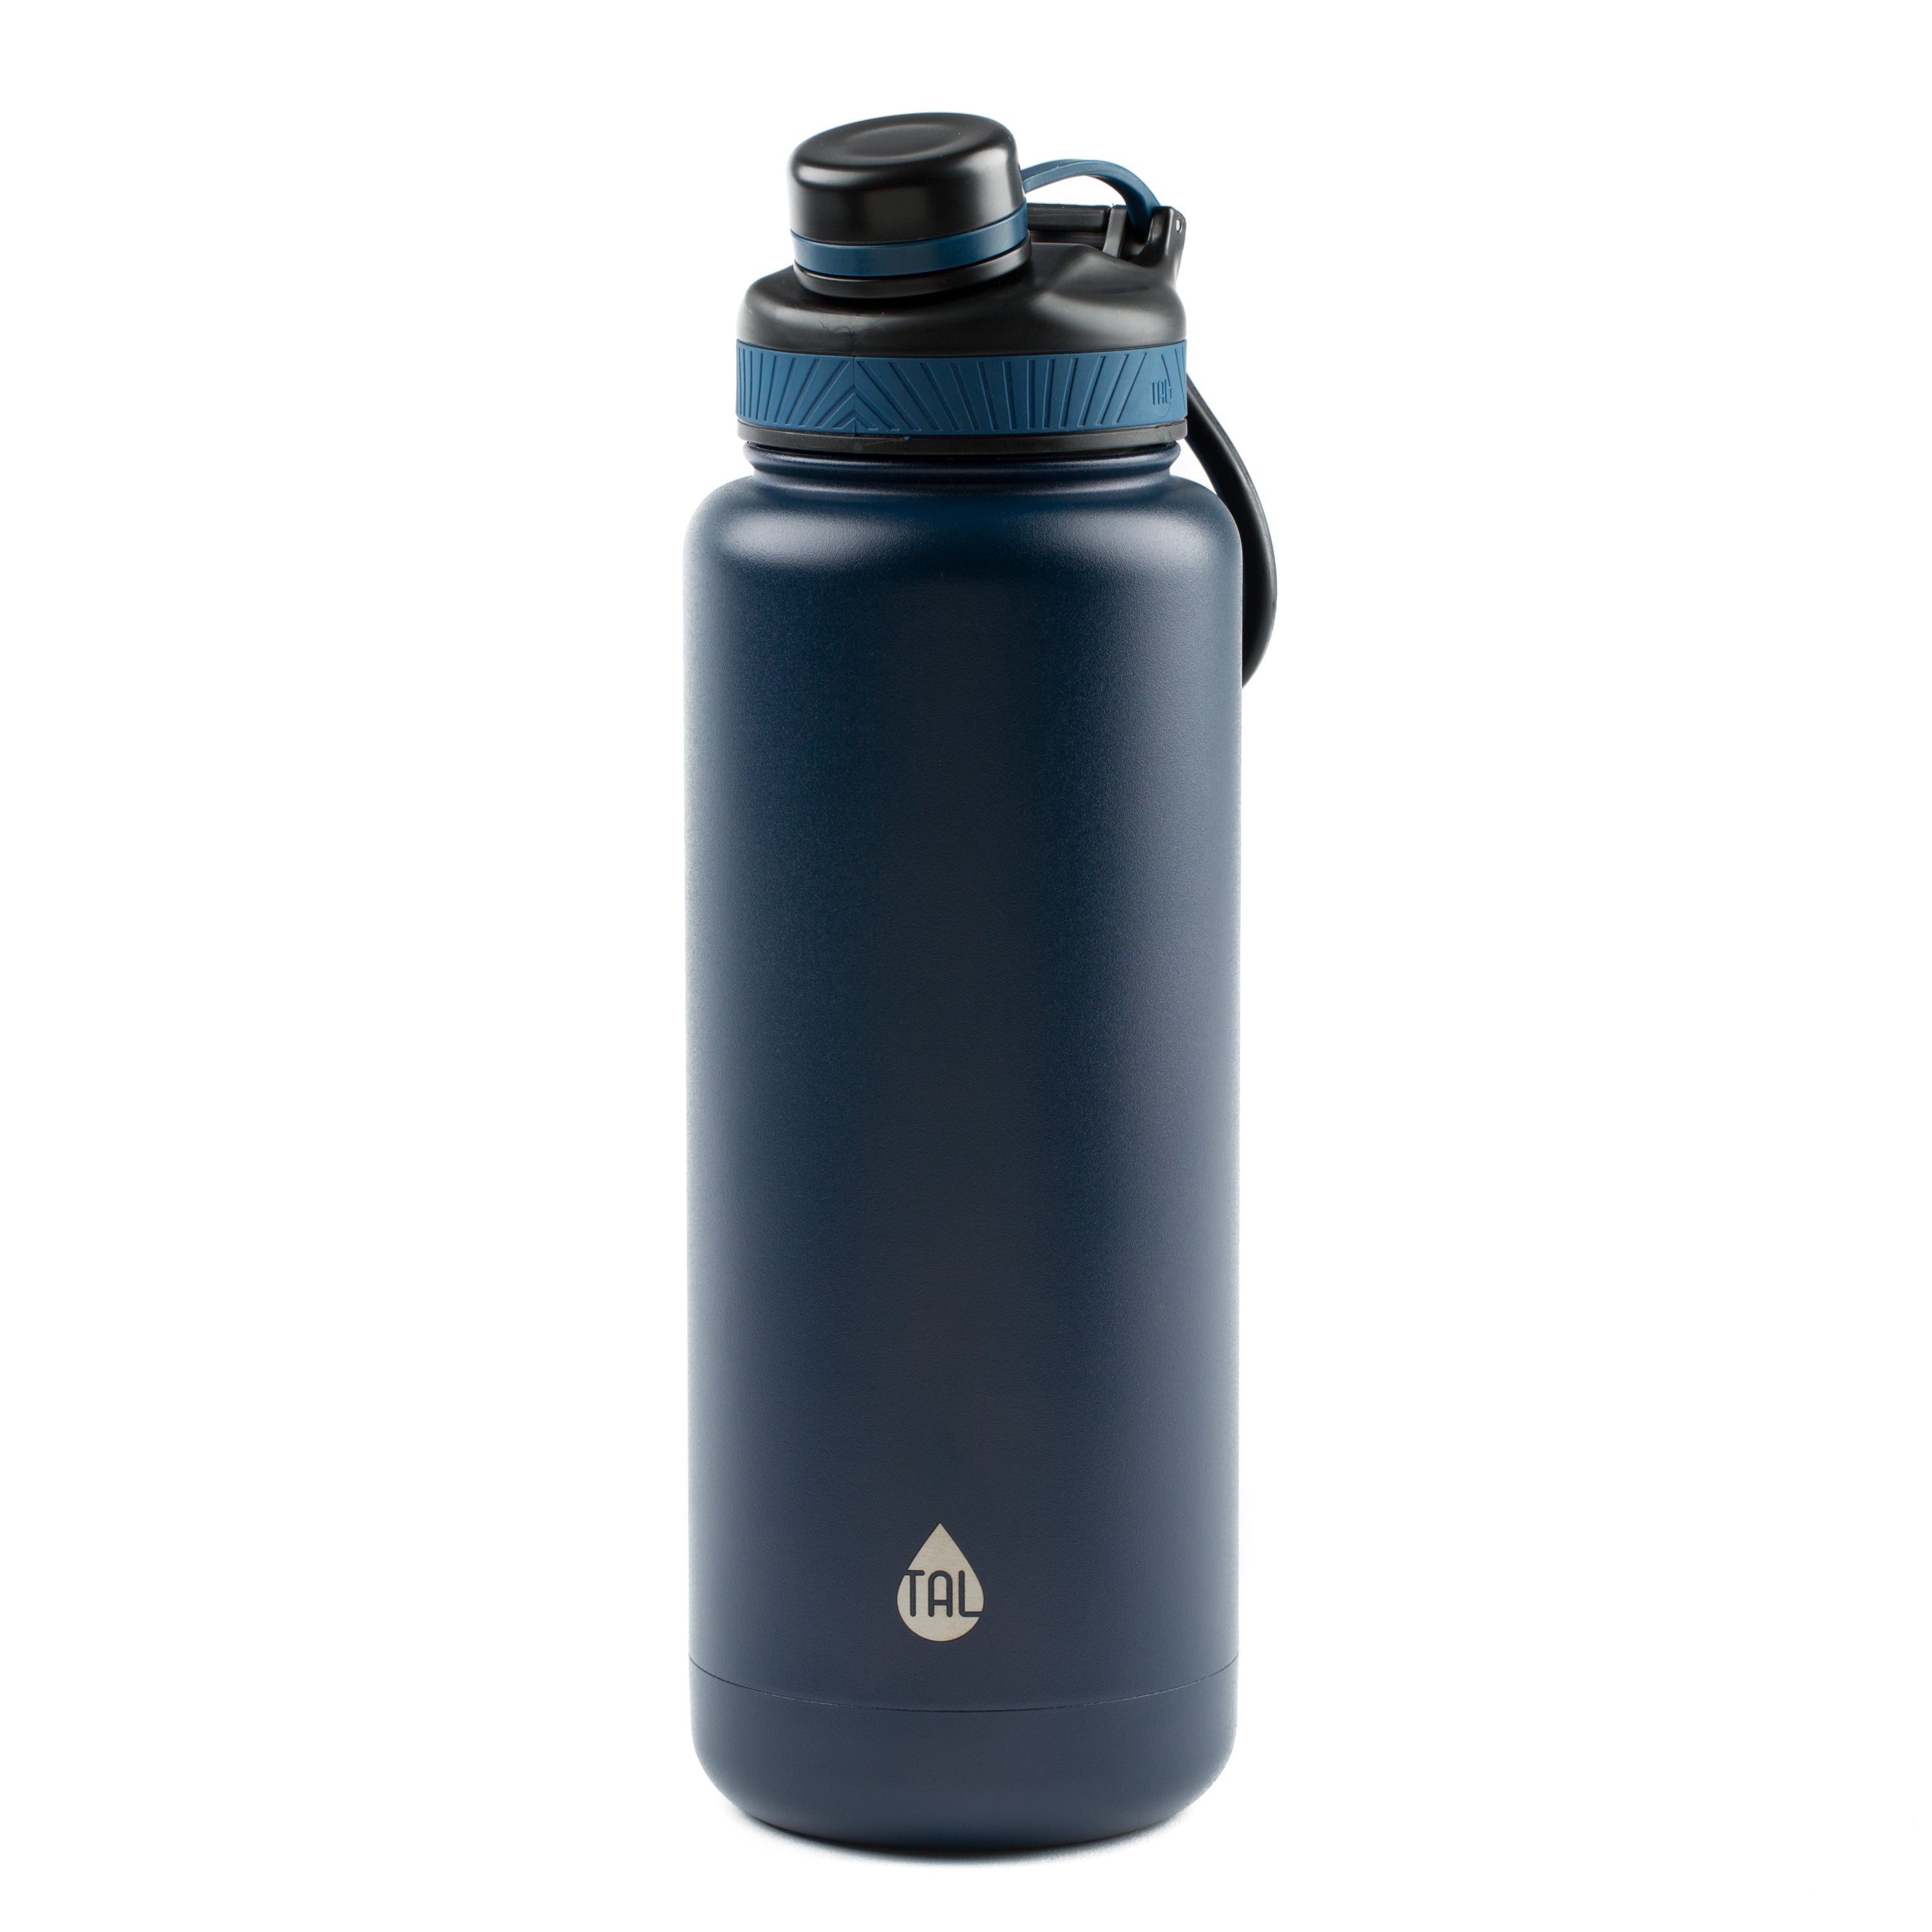 TAL Water Bottle Double Wall Insulated Stainless Steel Ranger Flip